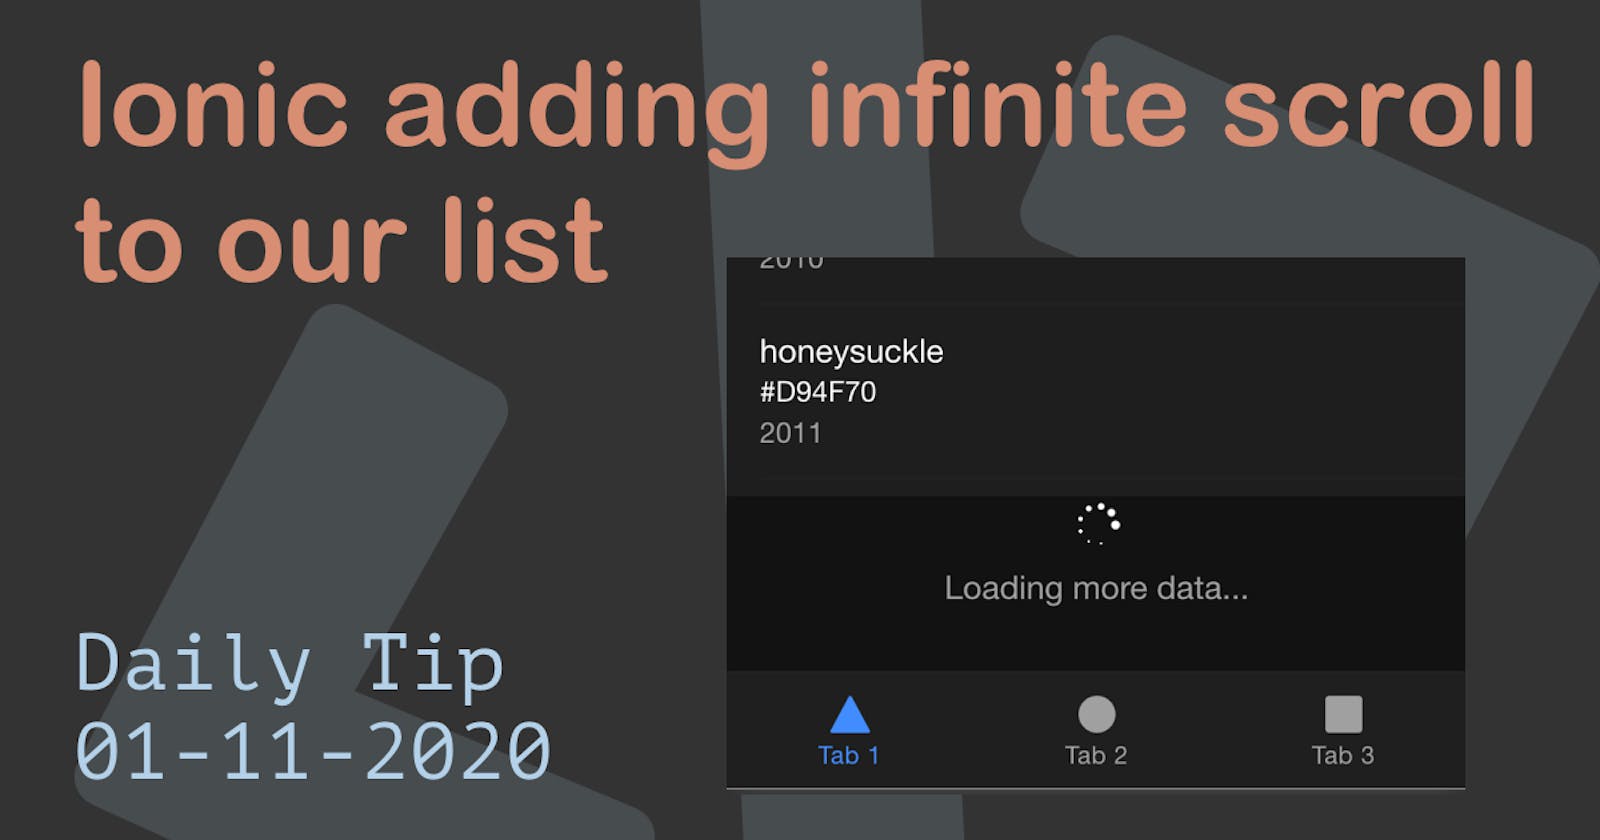 Ionic adding infinite scroll to our list